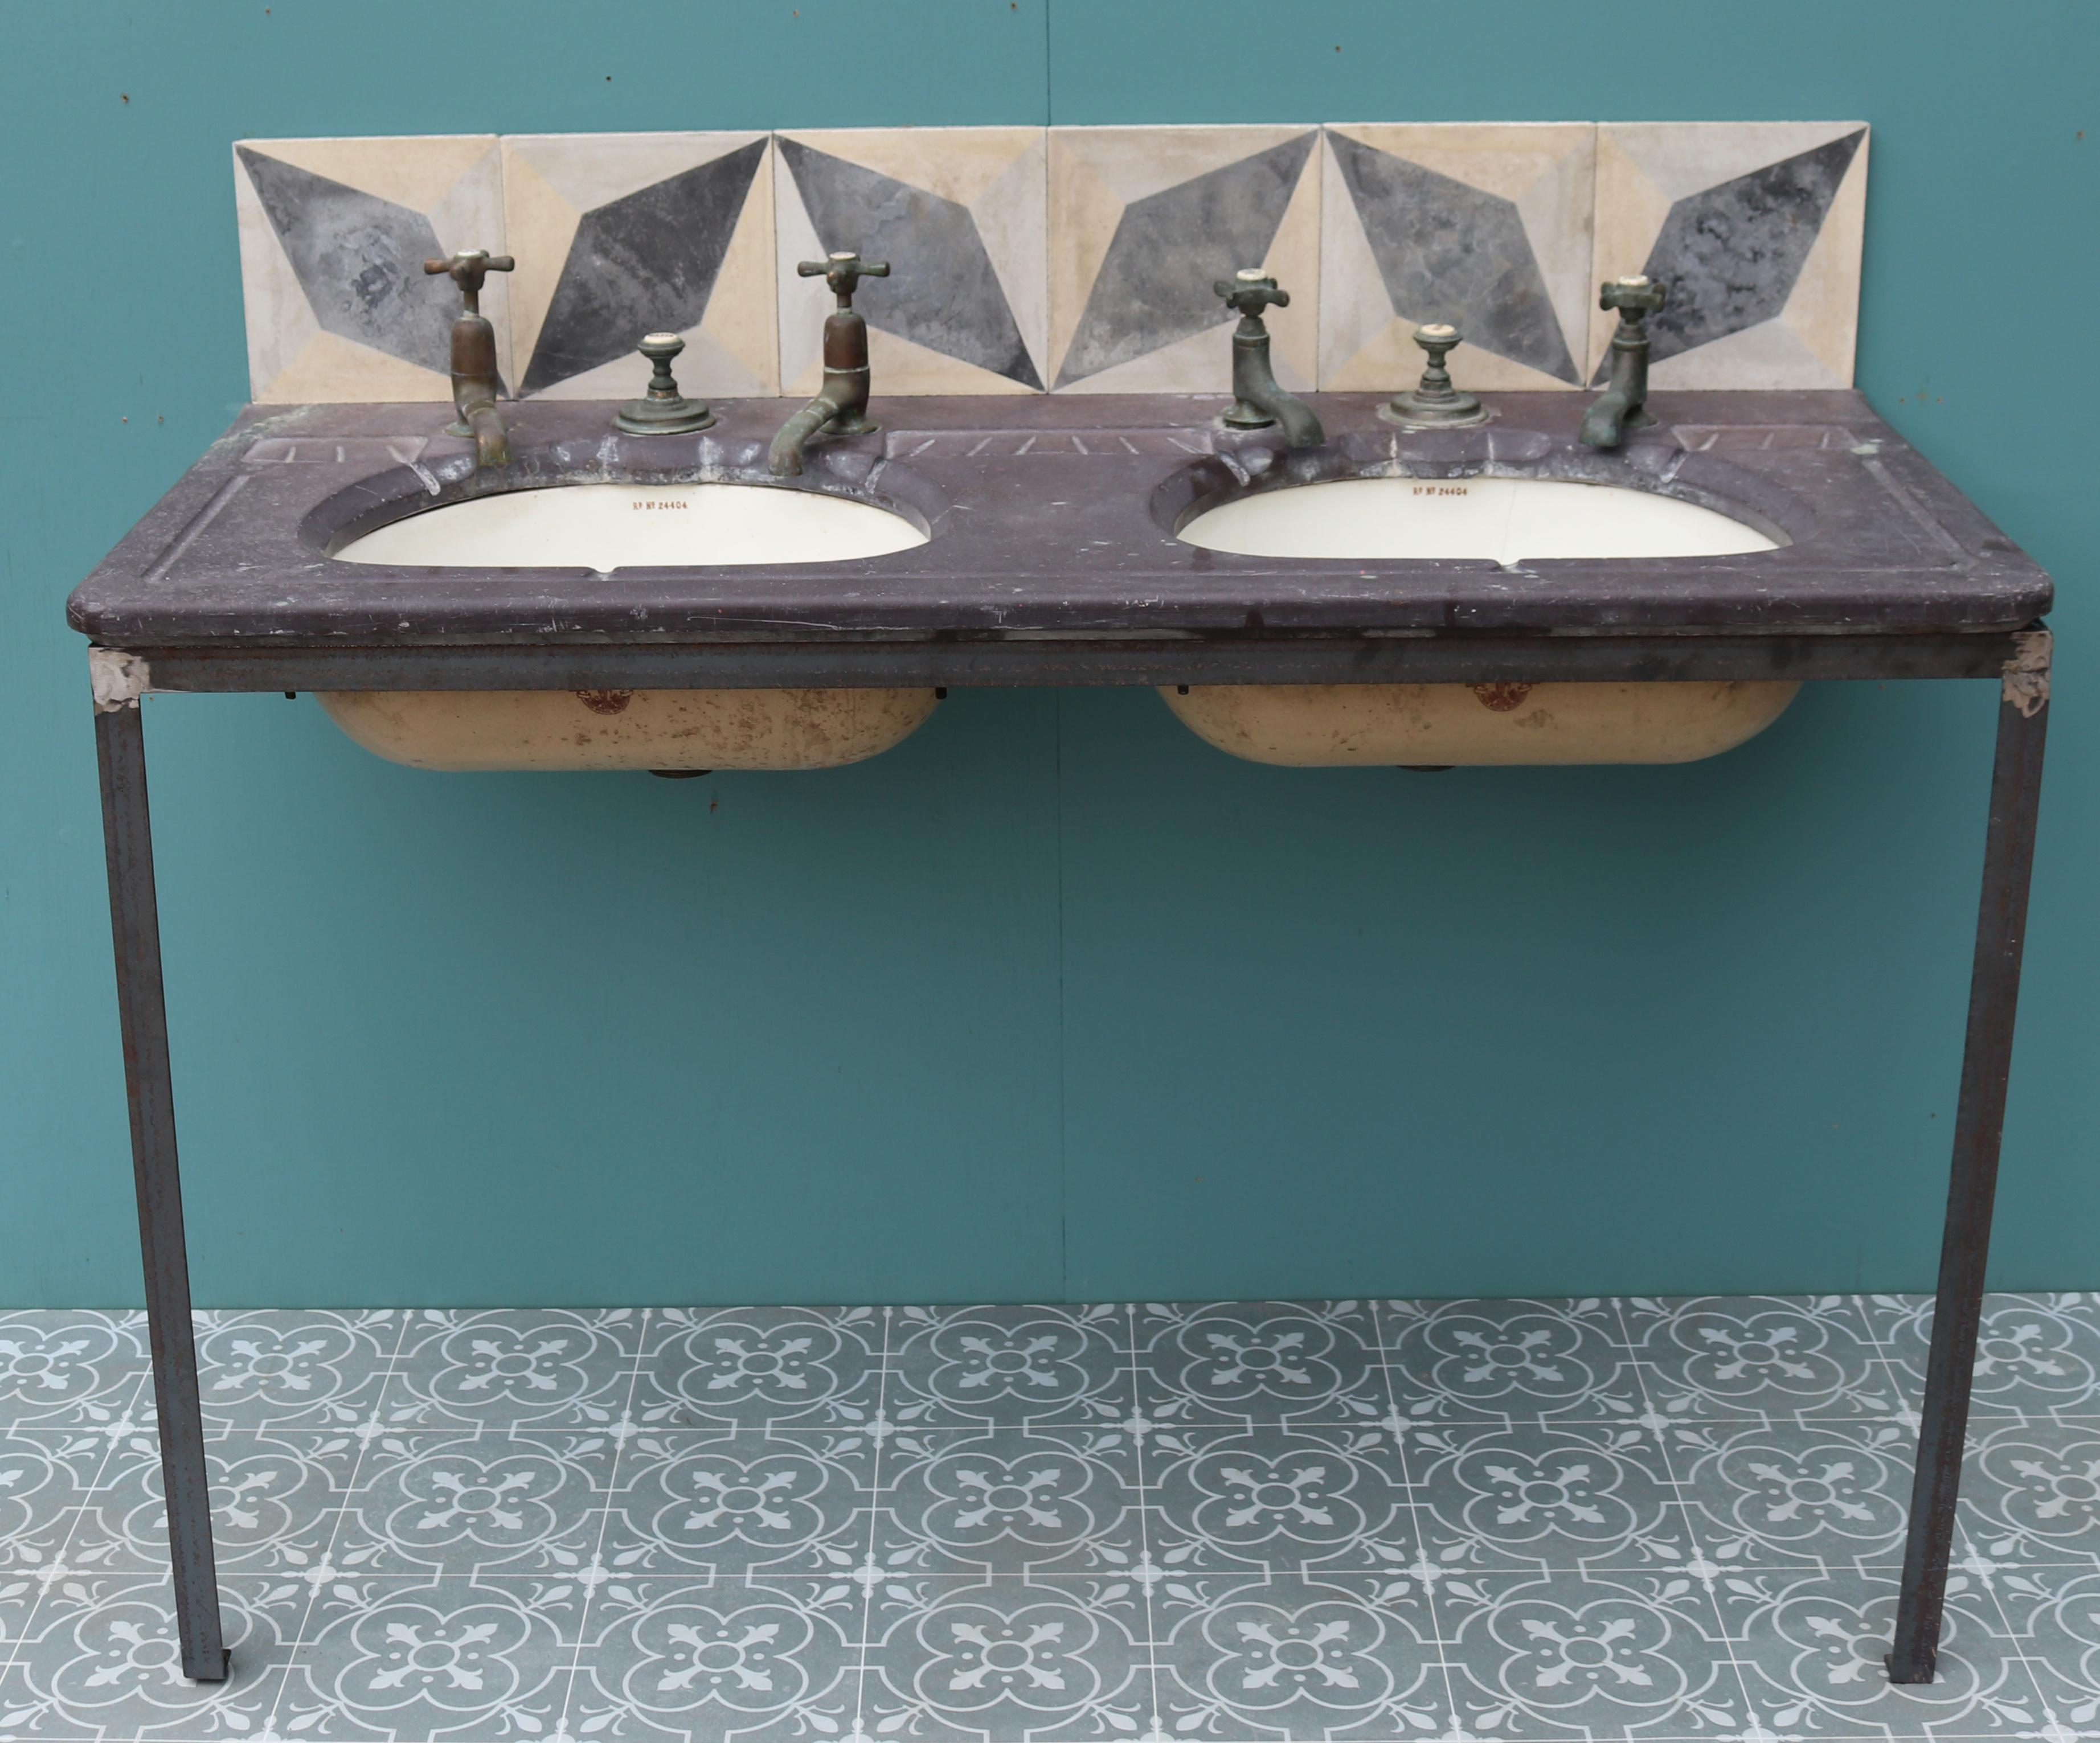 A reclaimed antique double basin or sink by Morrison Ingram & Co. Registered design number 24404. Constructed with a slate top, and under-mounted glazed stoneware basins. Supplied on a modern steel stand and tiles to form a splash-back.

We have